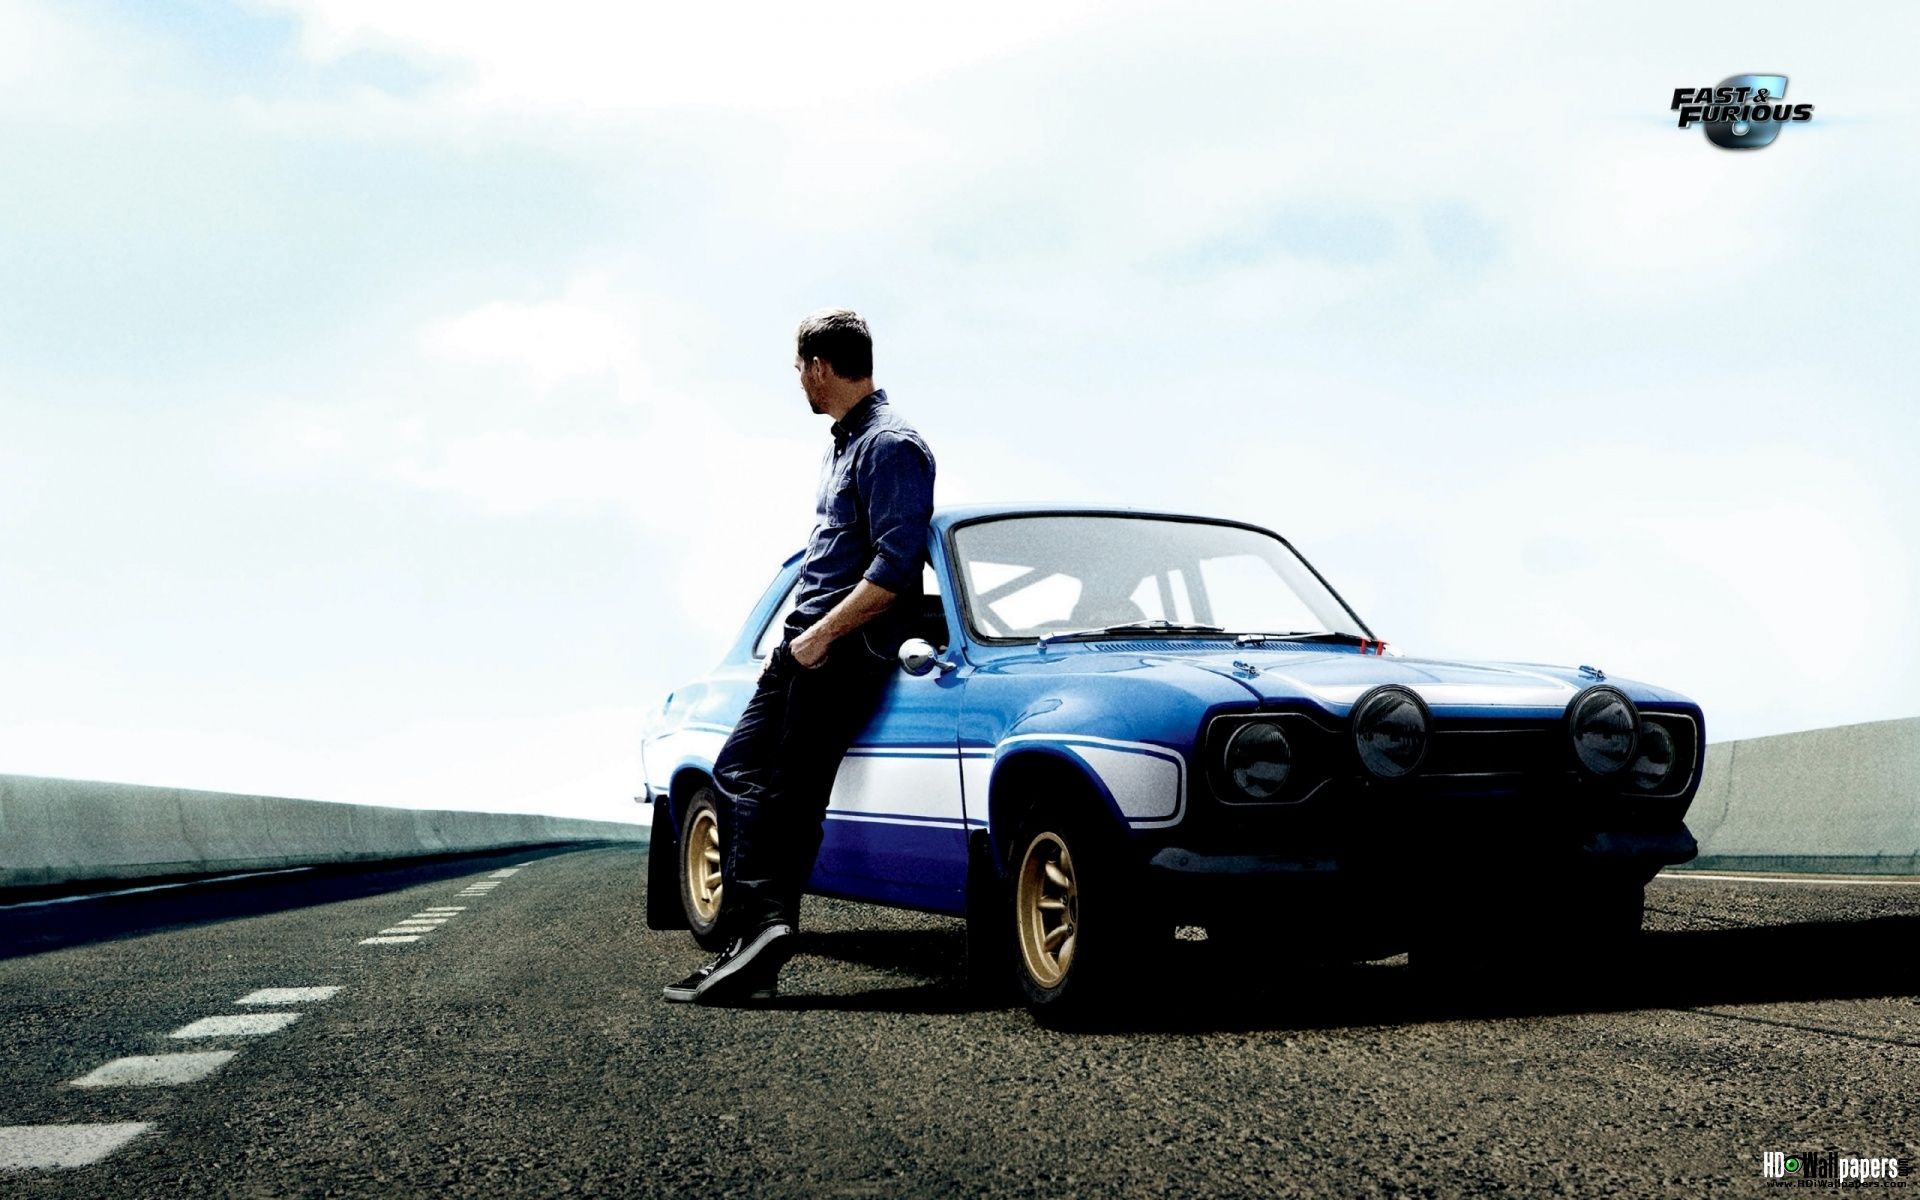 Fast & Furious 7 Windows 8.1 Theme and Wallpaper All for Windows